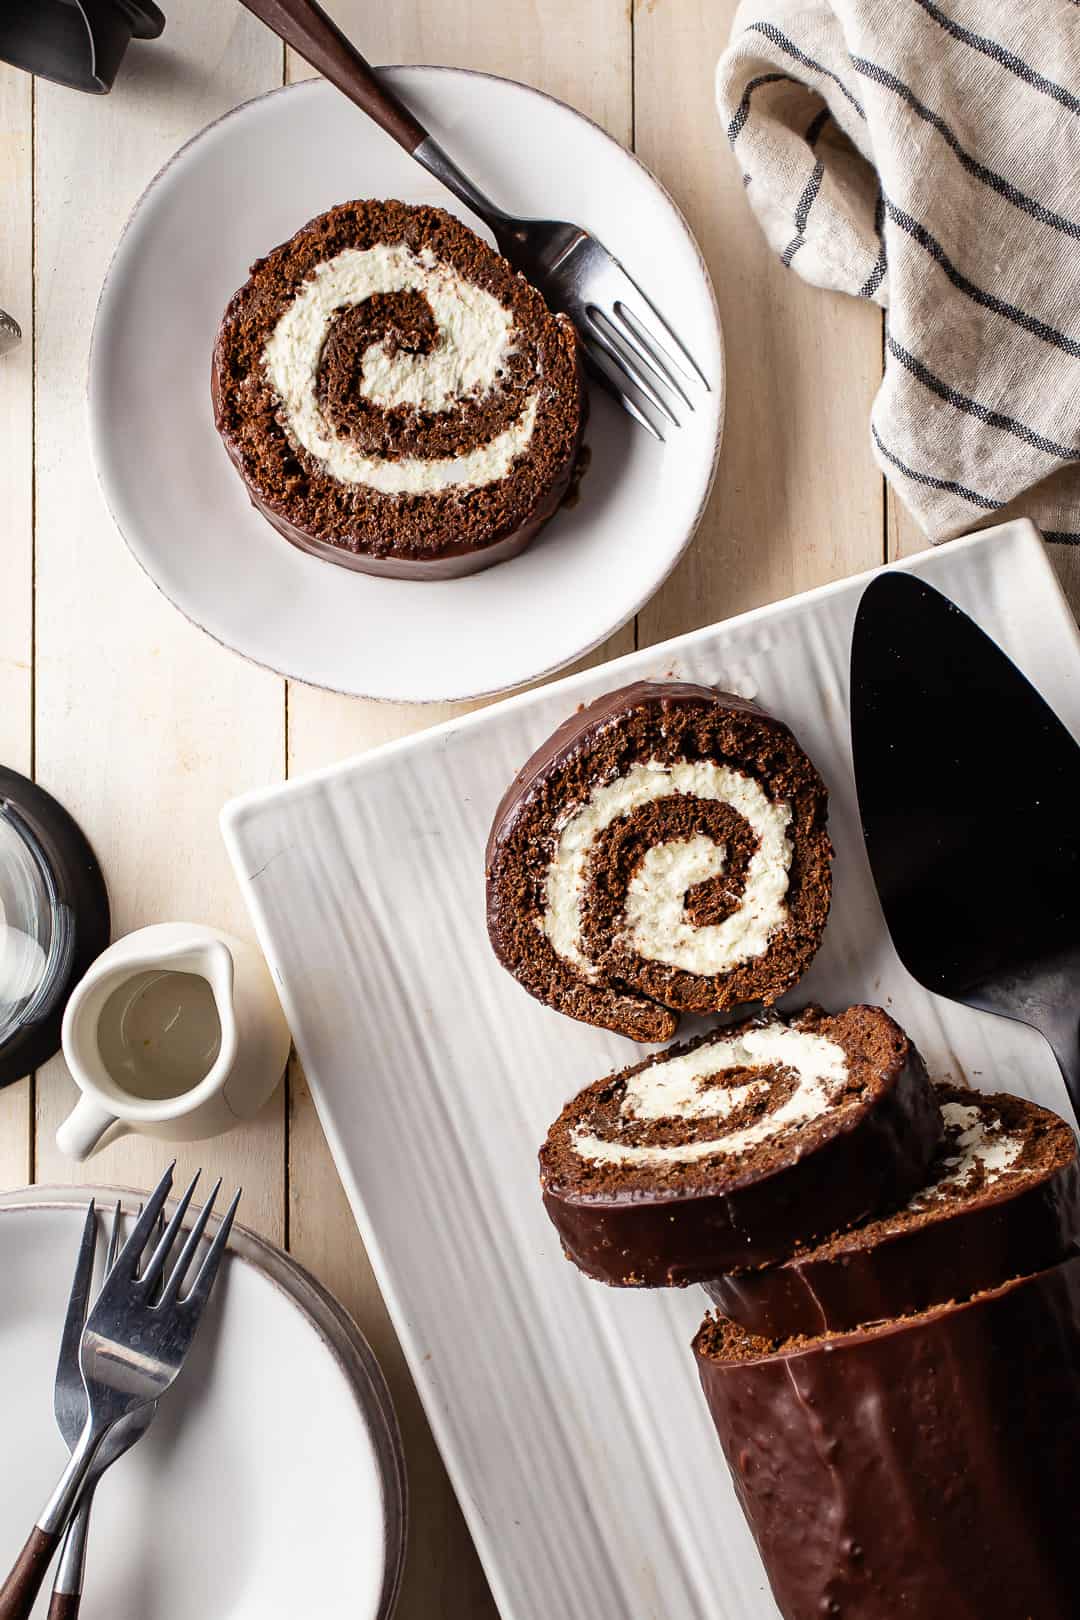 Swiss roll cake recipe, prepared, sliced, and presented on white plates.